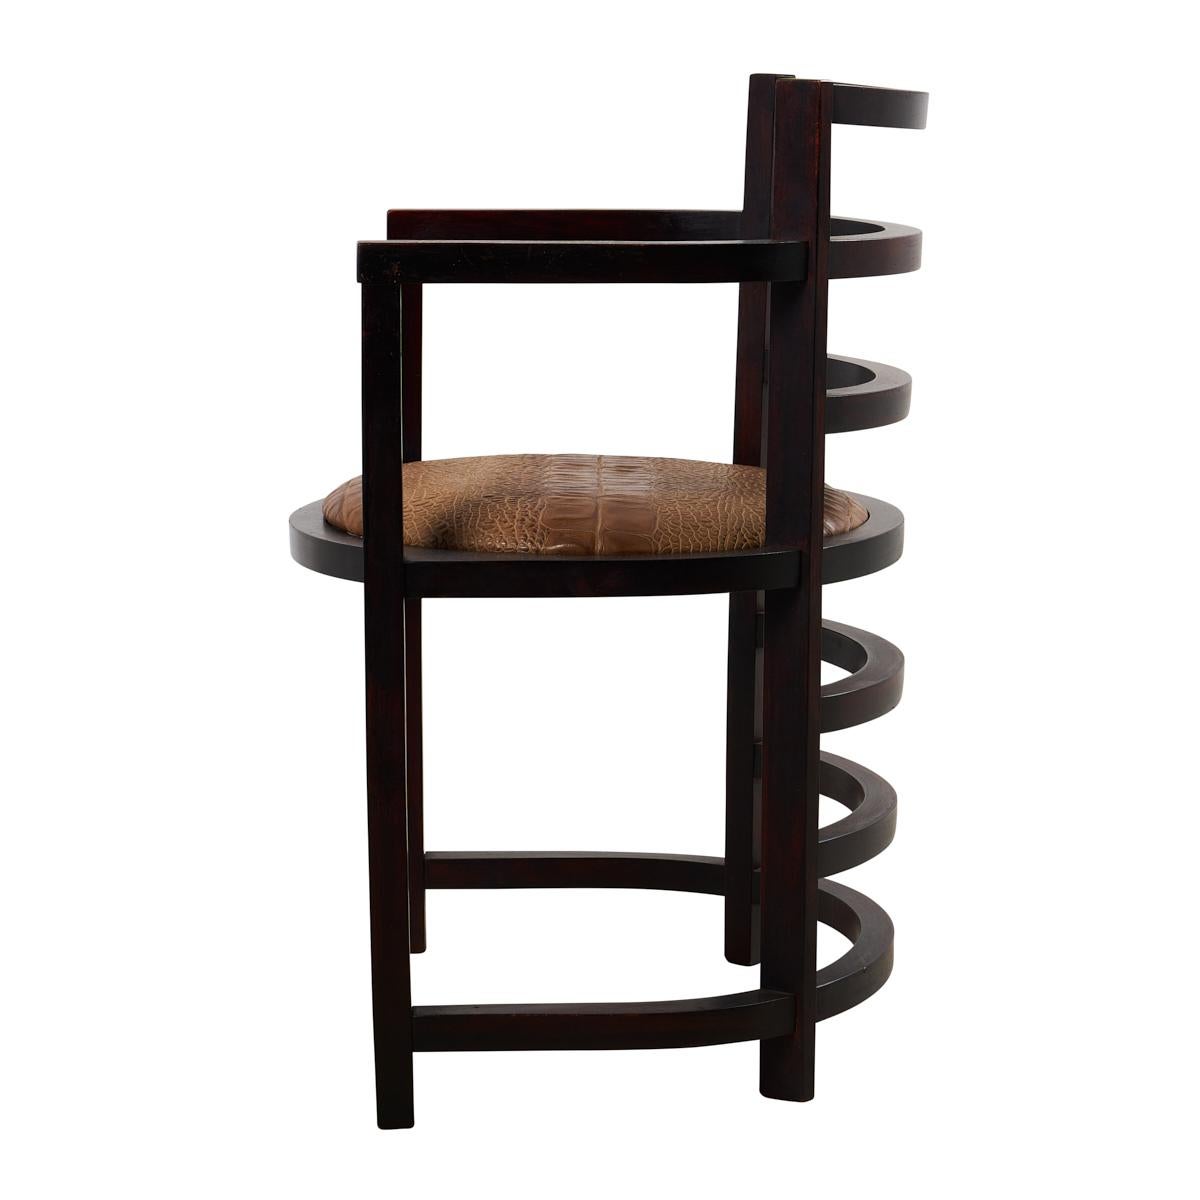 With its handsome, curvilinear frame and upholstered seat, this sculptural armchair evokes Josef Hoffman’s turn-of-the-century bentwood designs for the Cafe Fledermaus in Vienna. The ideal desk or pull-up chair, it makes a stylish, architectural